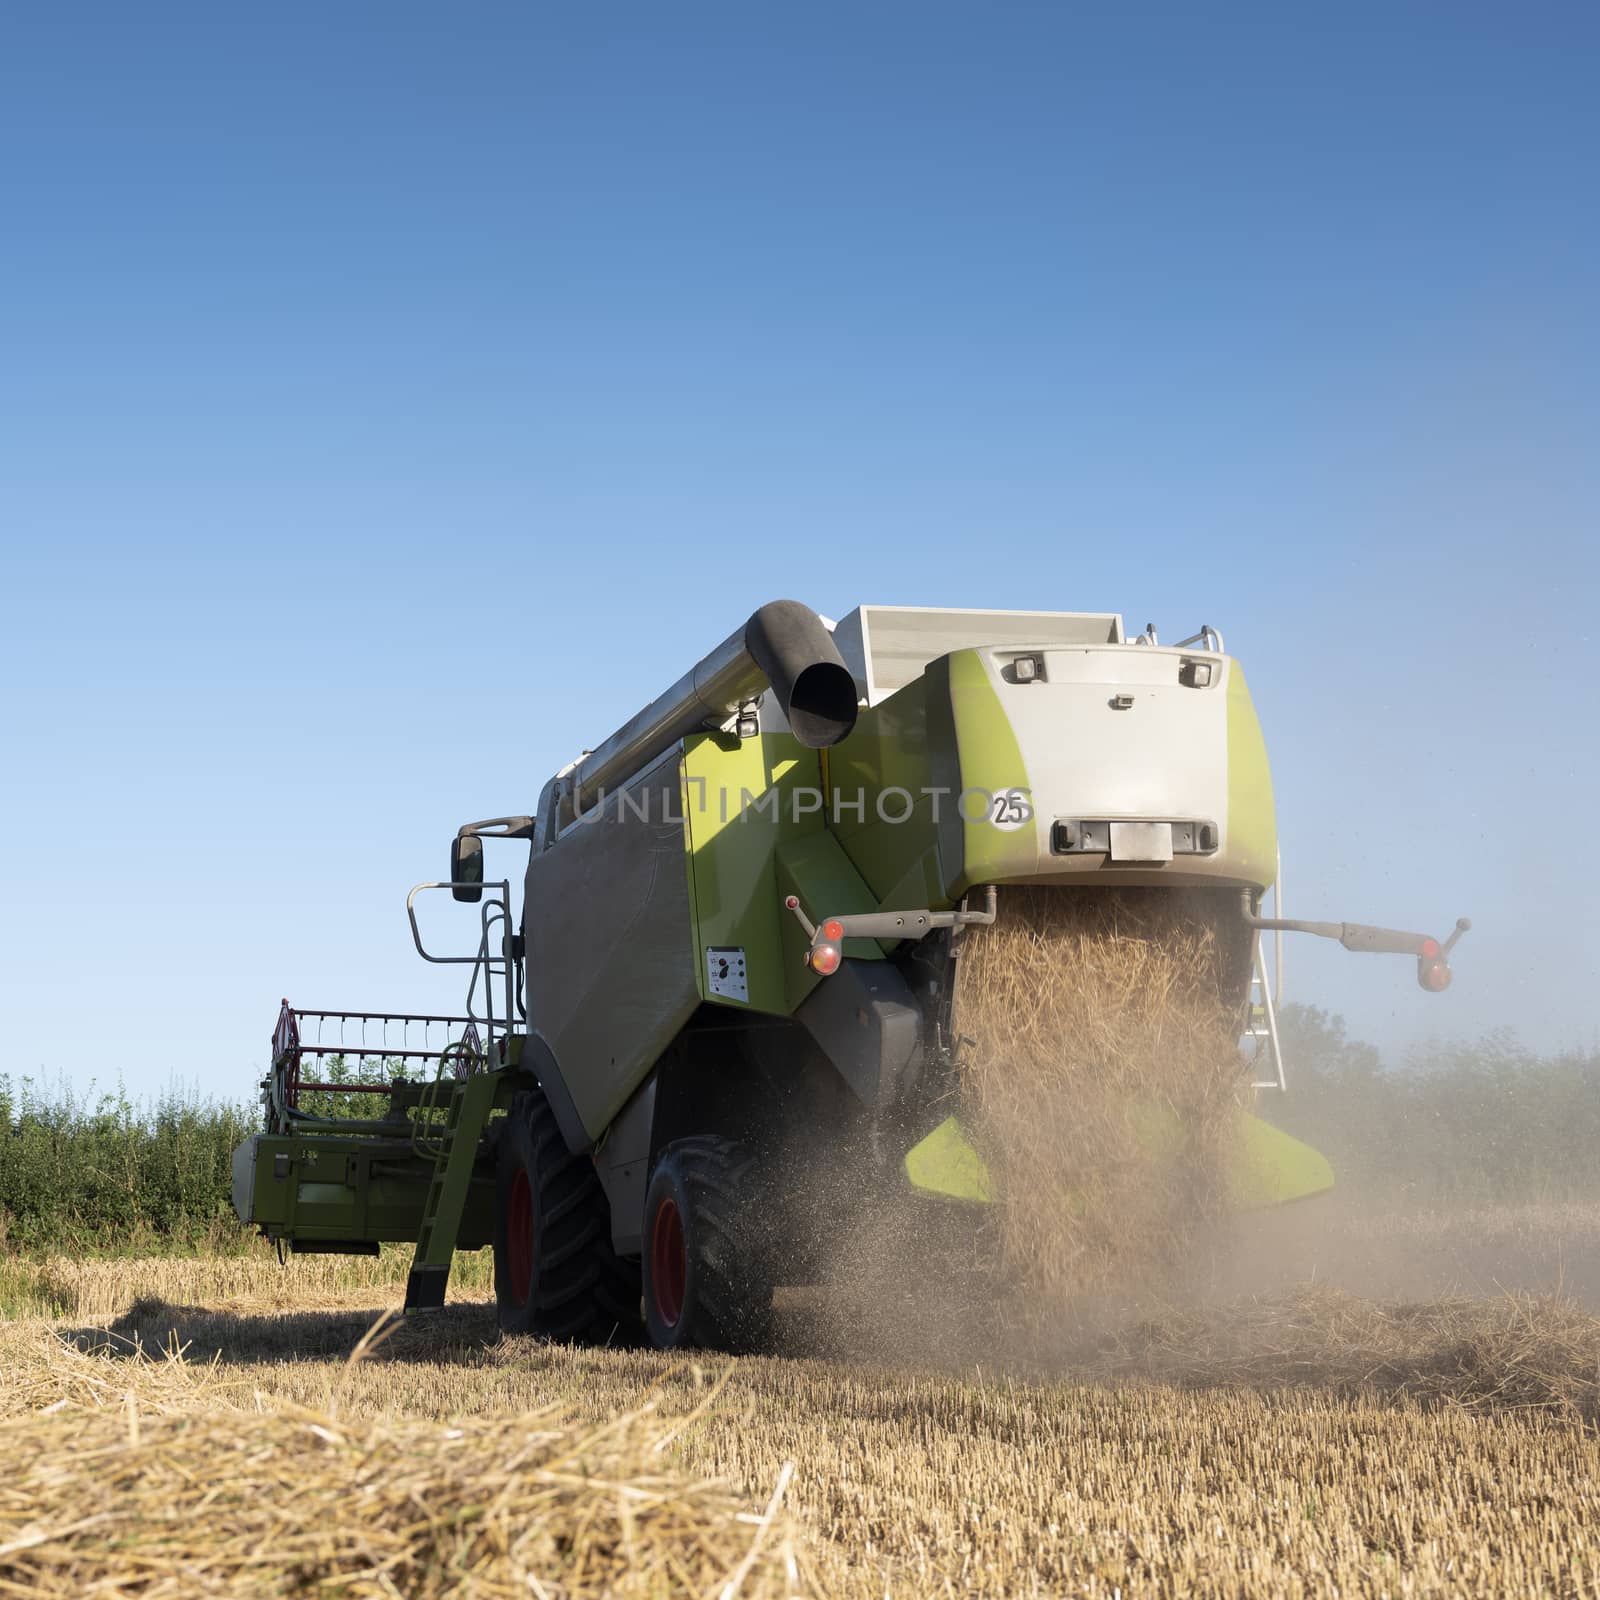 combine working on grain field under blue sky during harvest in the north of france